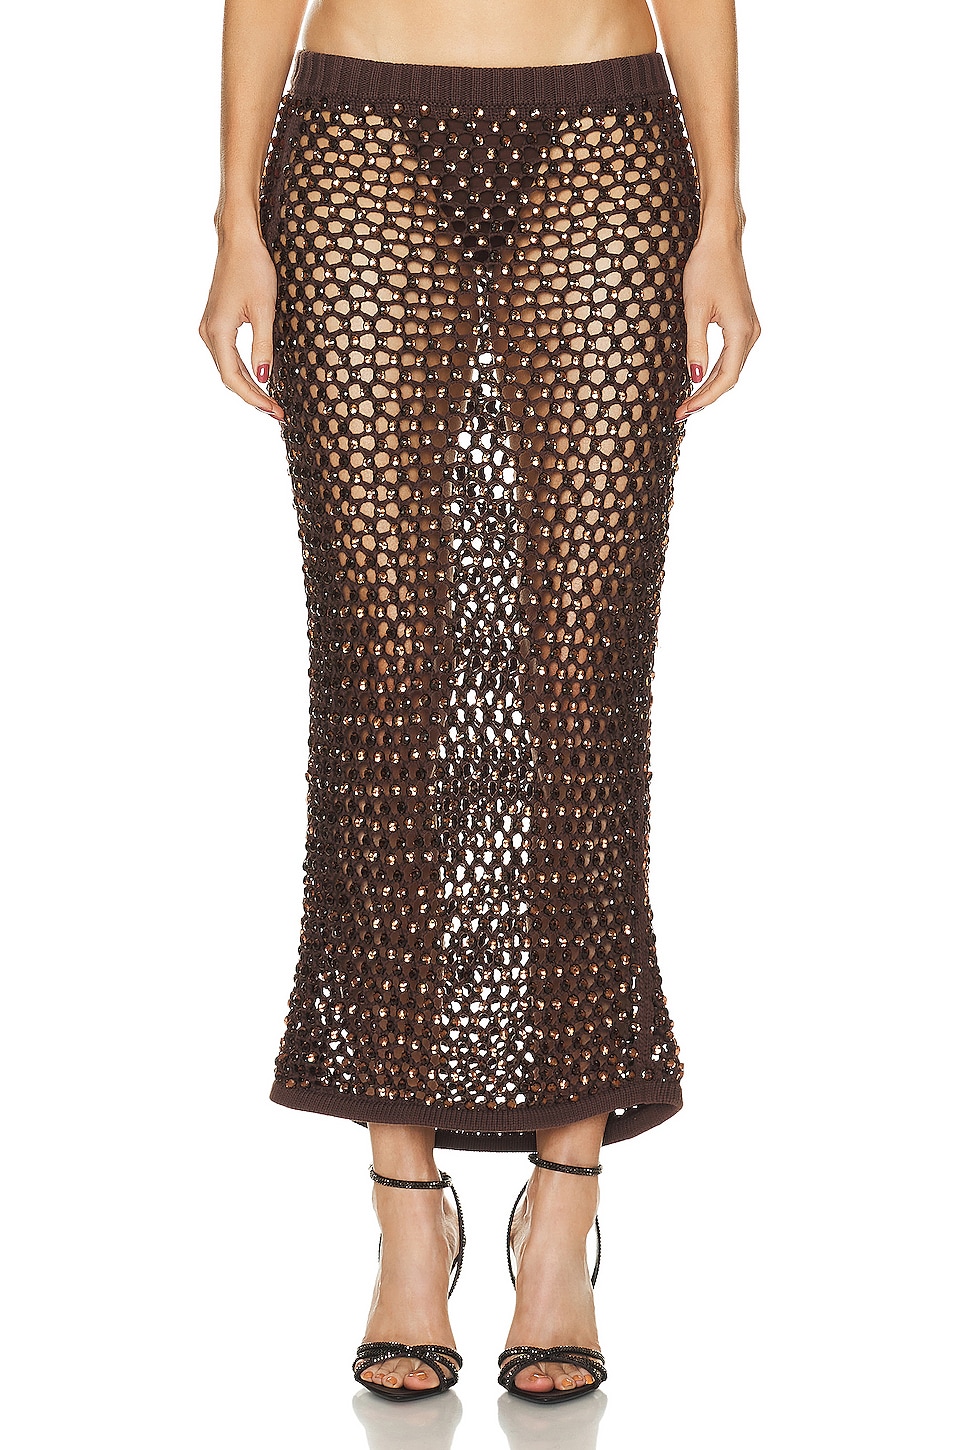 Image 1 of Diotima Spice Skirt in Coffee